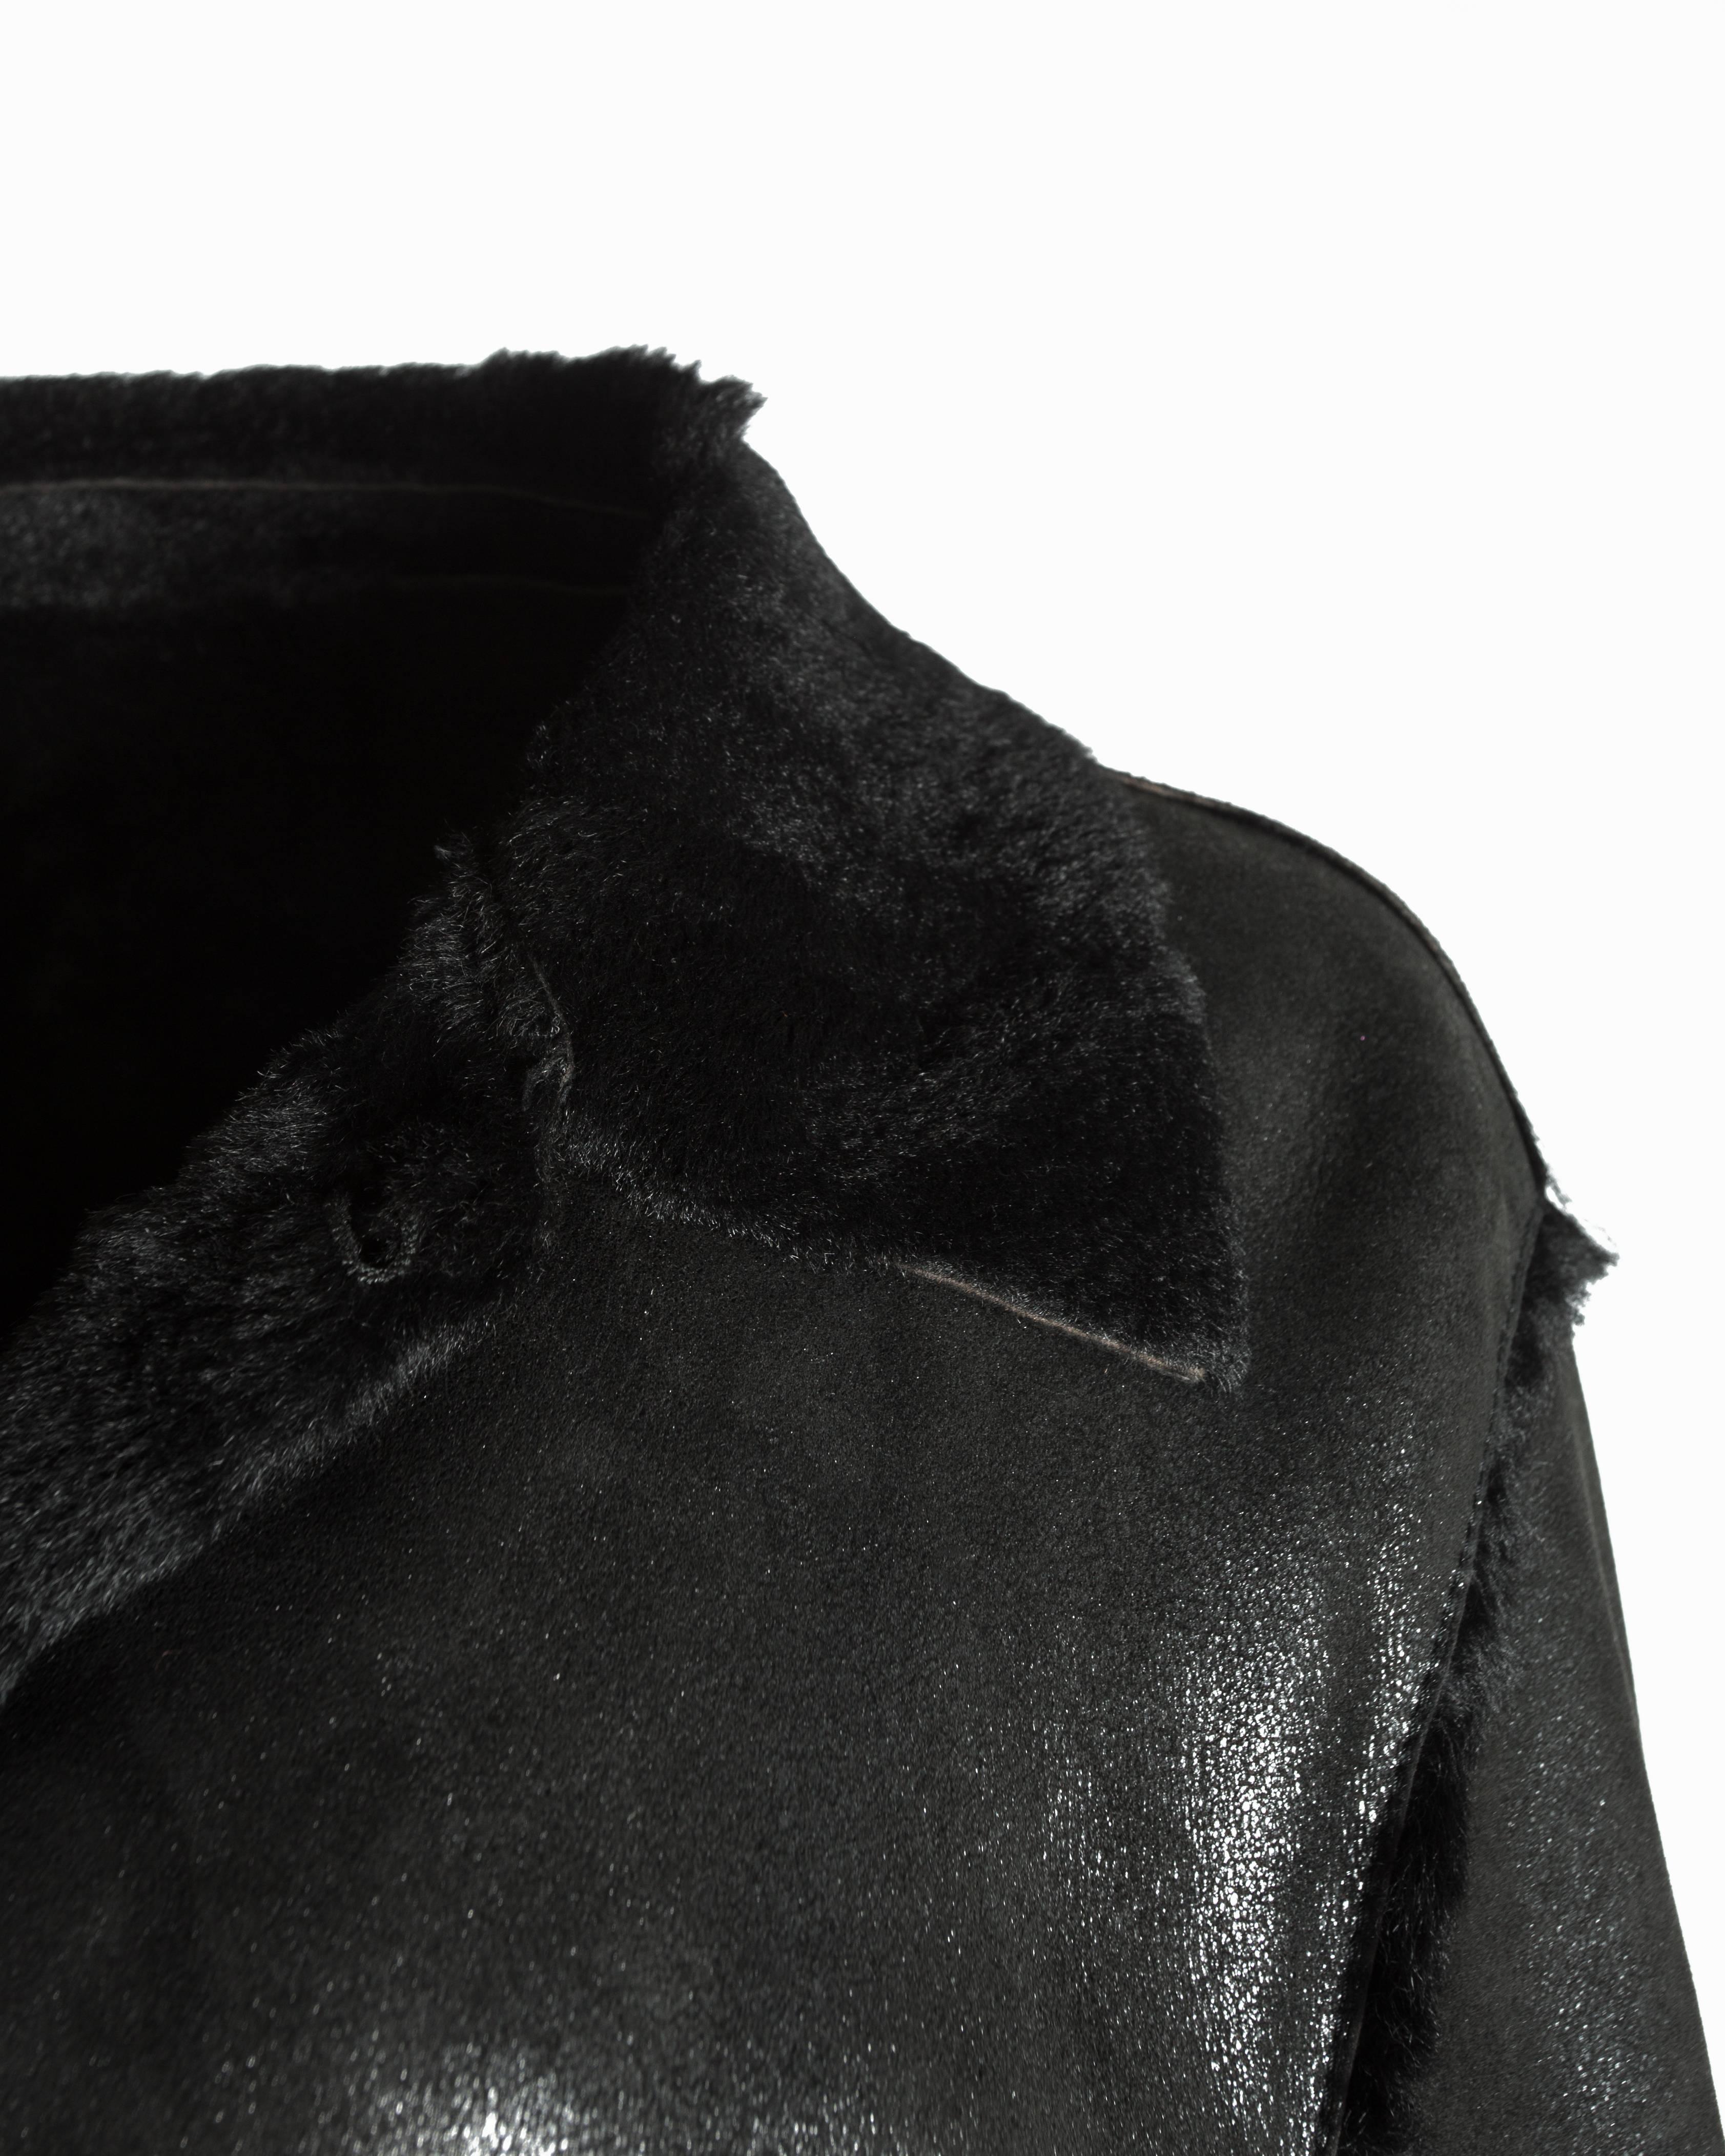 Dolce & Gabbana men's black leather and fur reversible coat, A/W 1998 2